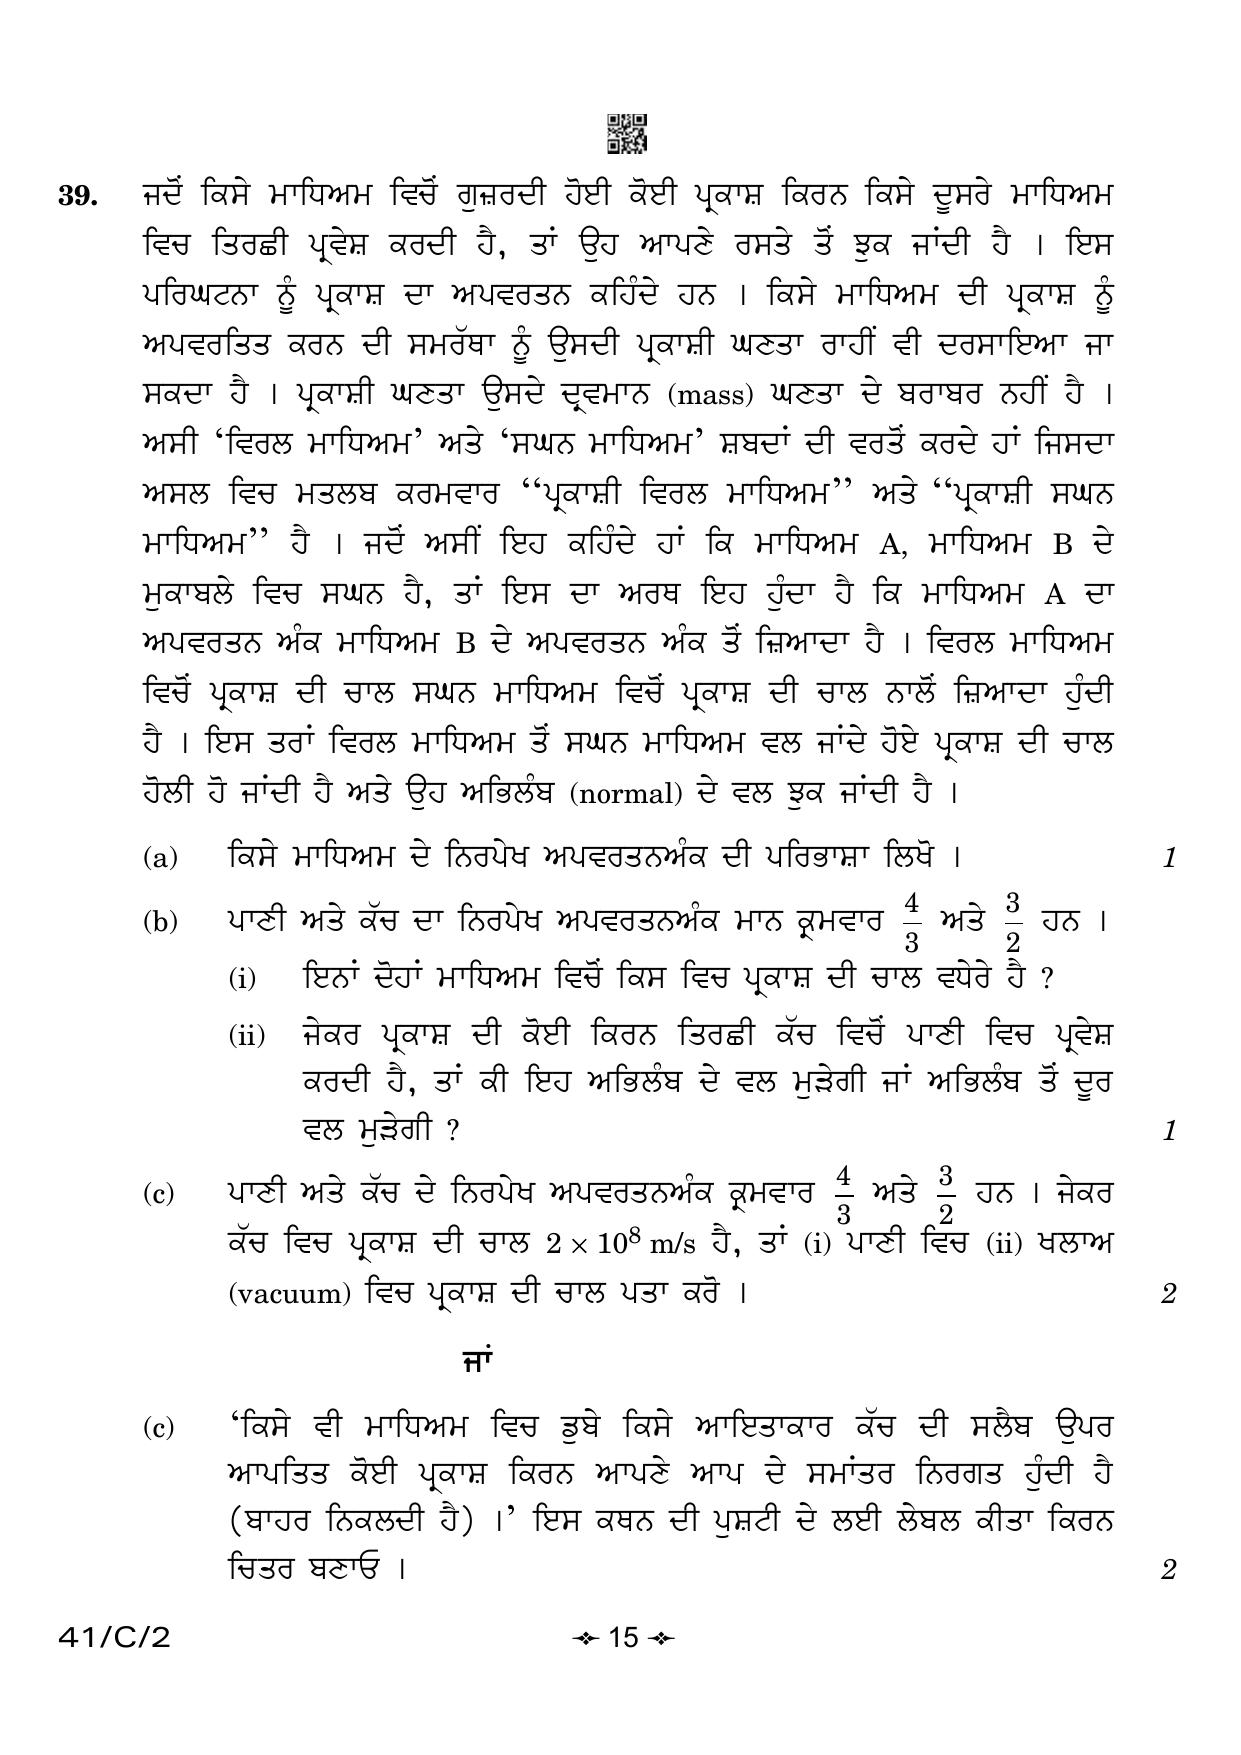 CBSE Class 10 41-2 Science Punjabi 2023 (Compartment) Question Paper - Page 15